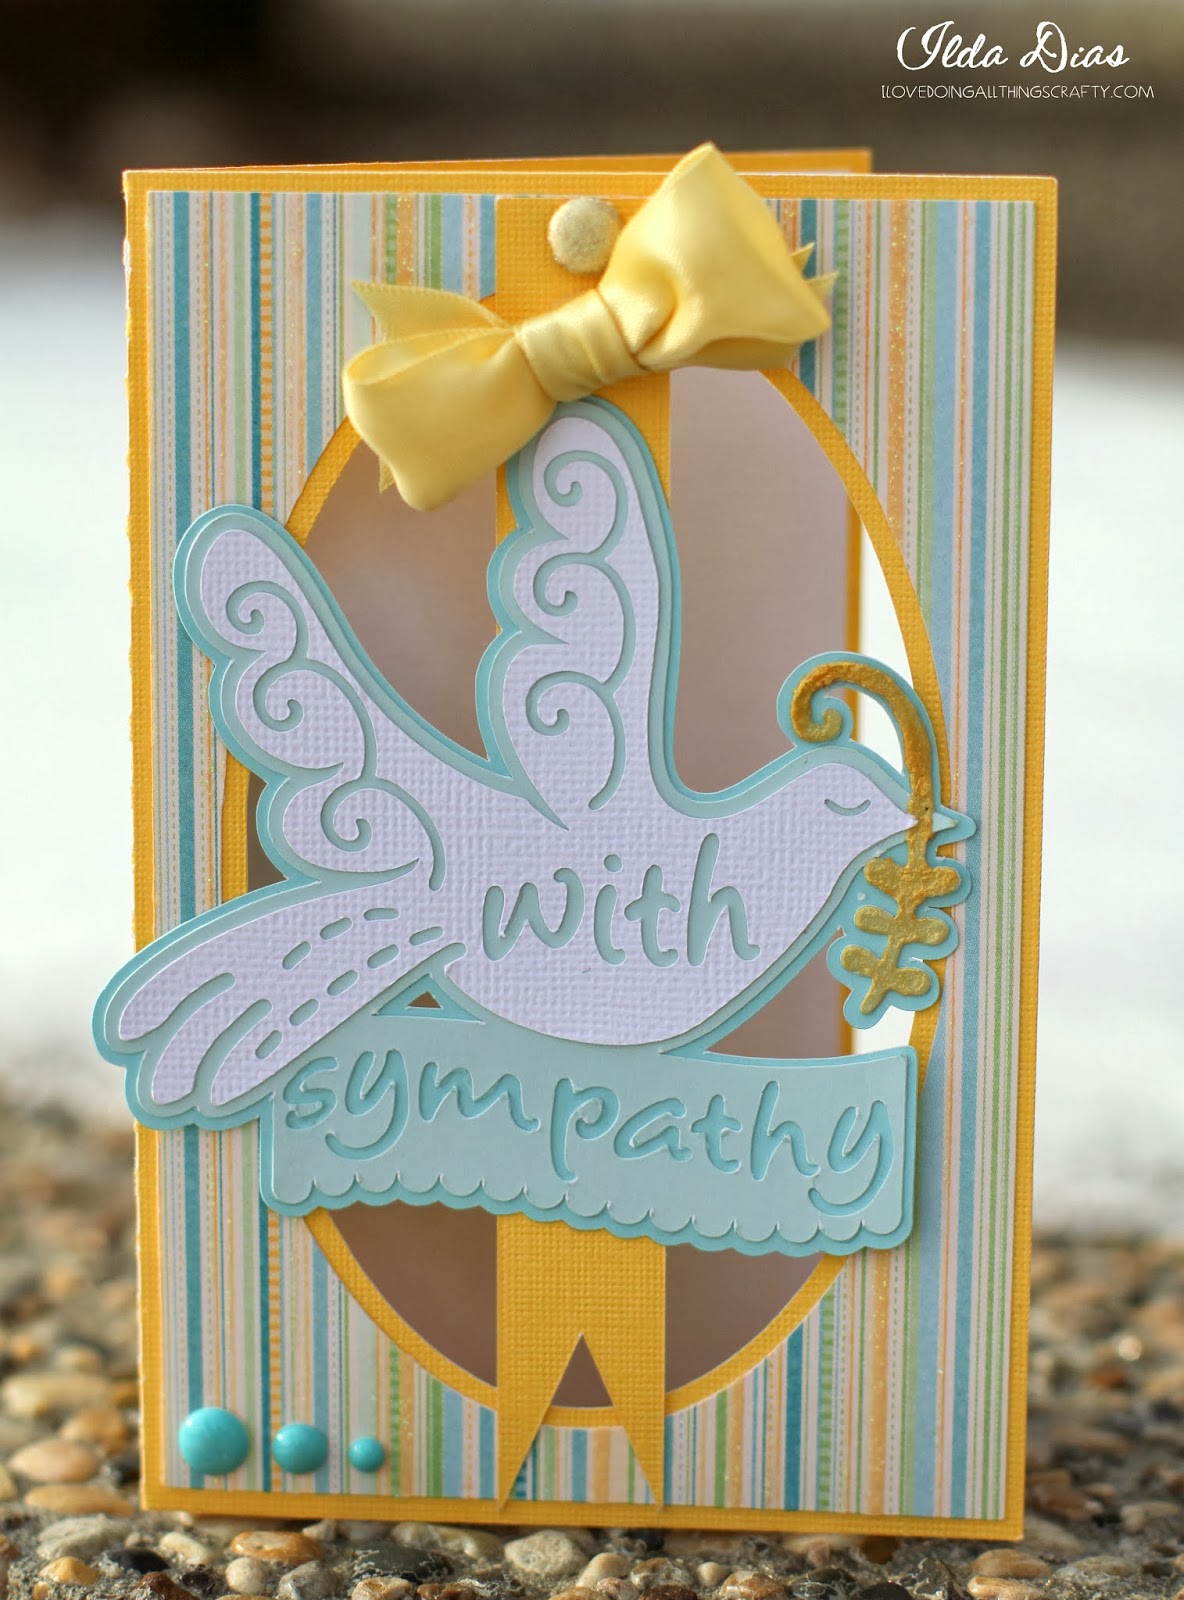 I Love Doing All Things Crafty: Sympathy Card | SVGCuts